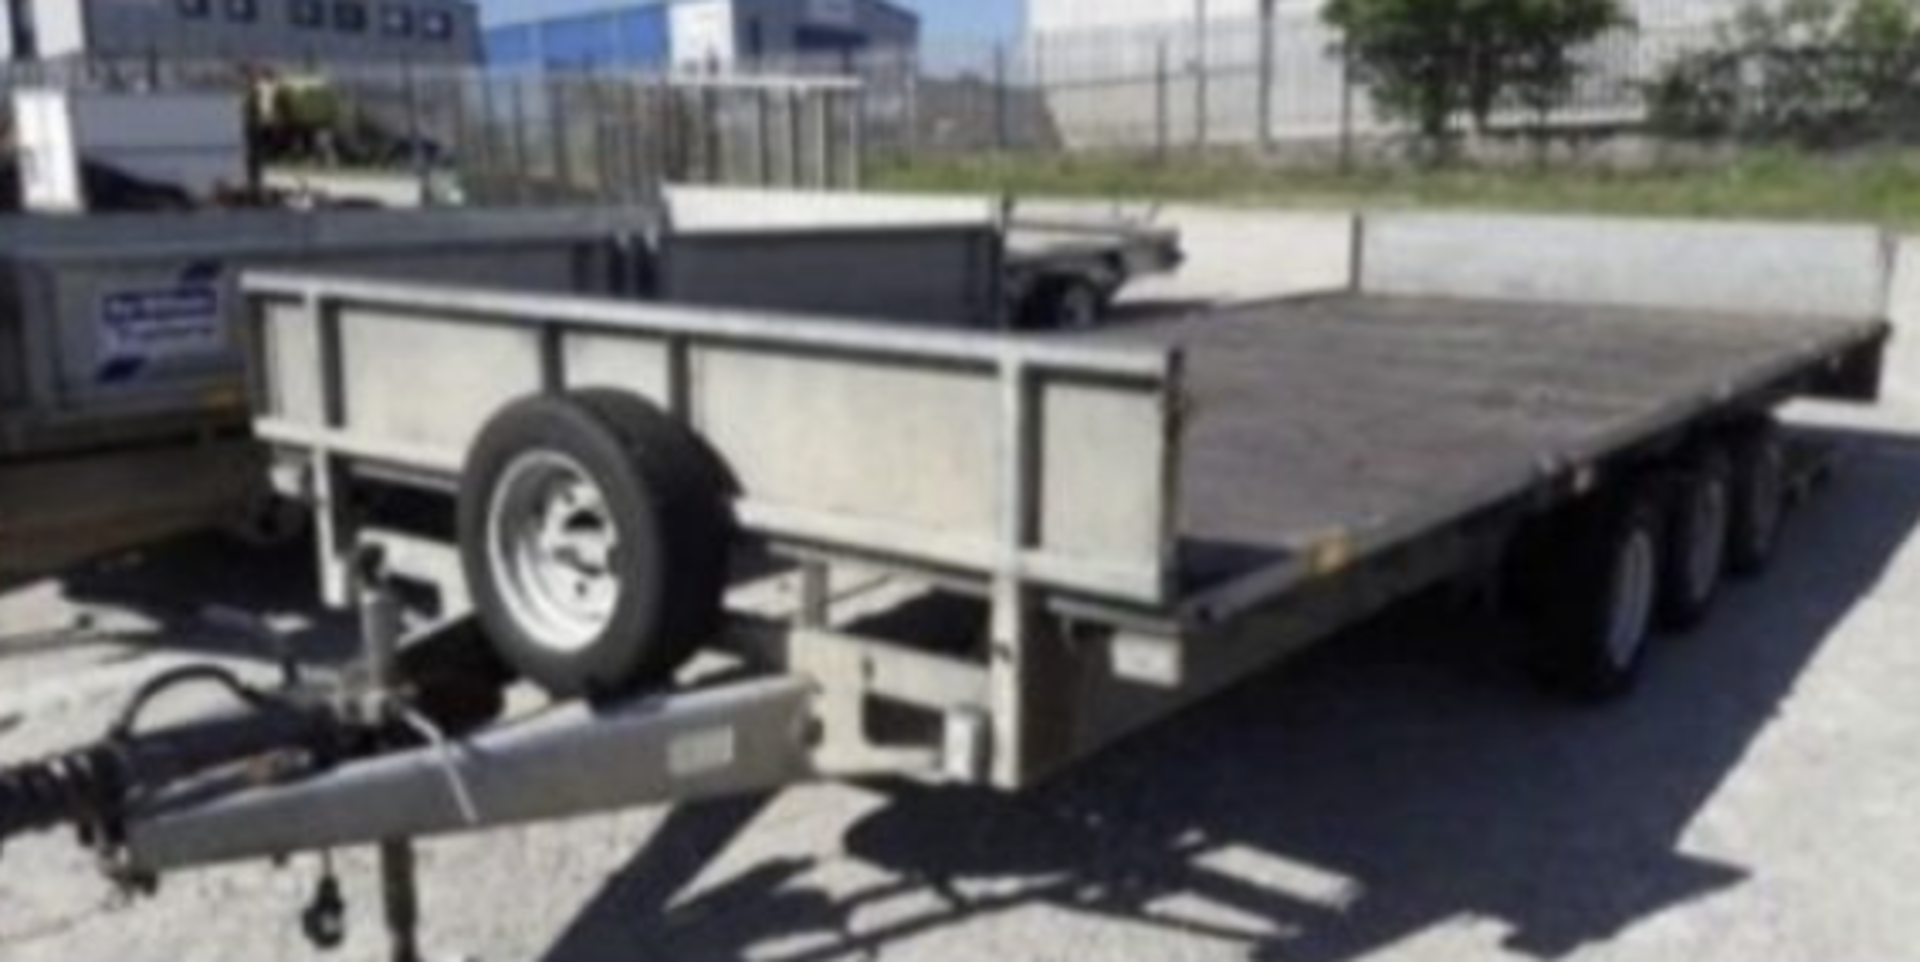 IFOR WILLIAMS LM187G TRI AXLE FLATBED TRAILER.LOCATION NORTHERN IRELAND. - Image 2 of 4